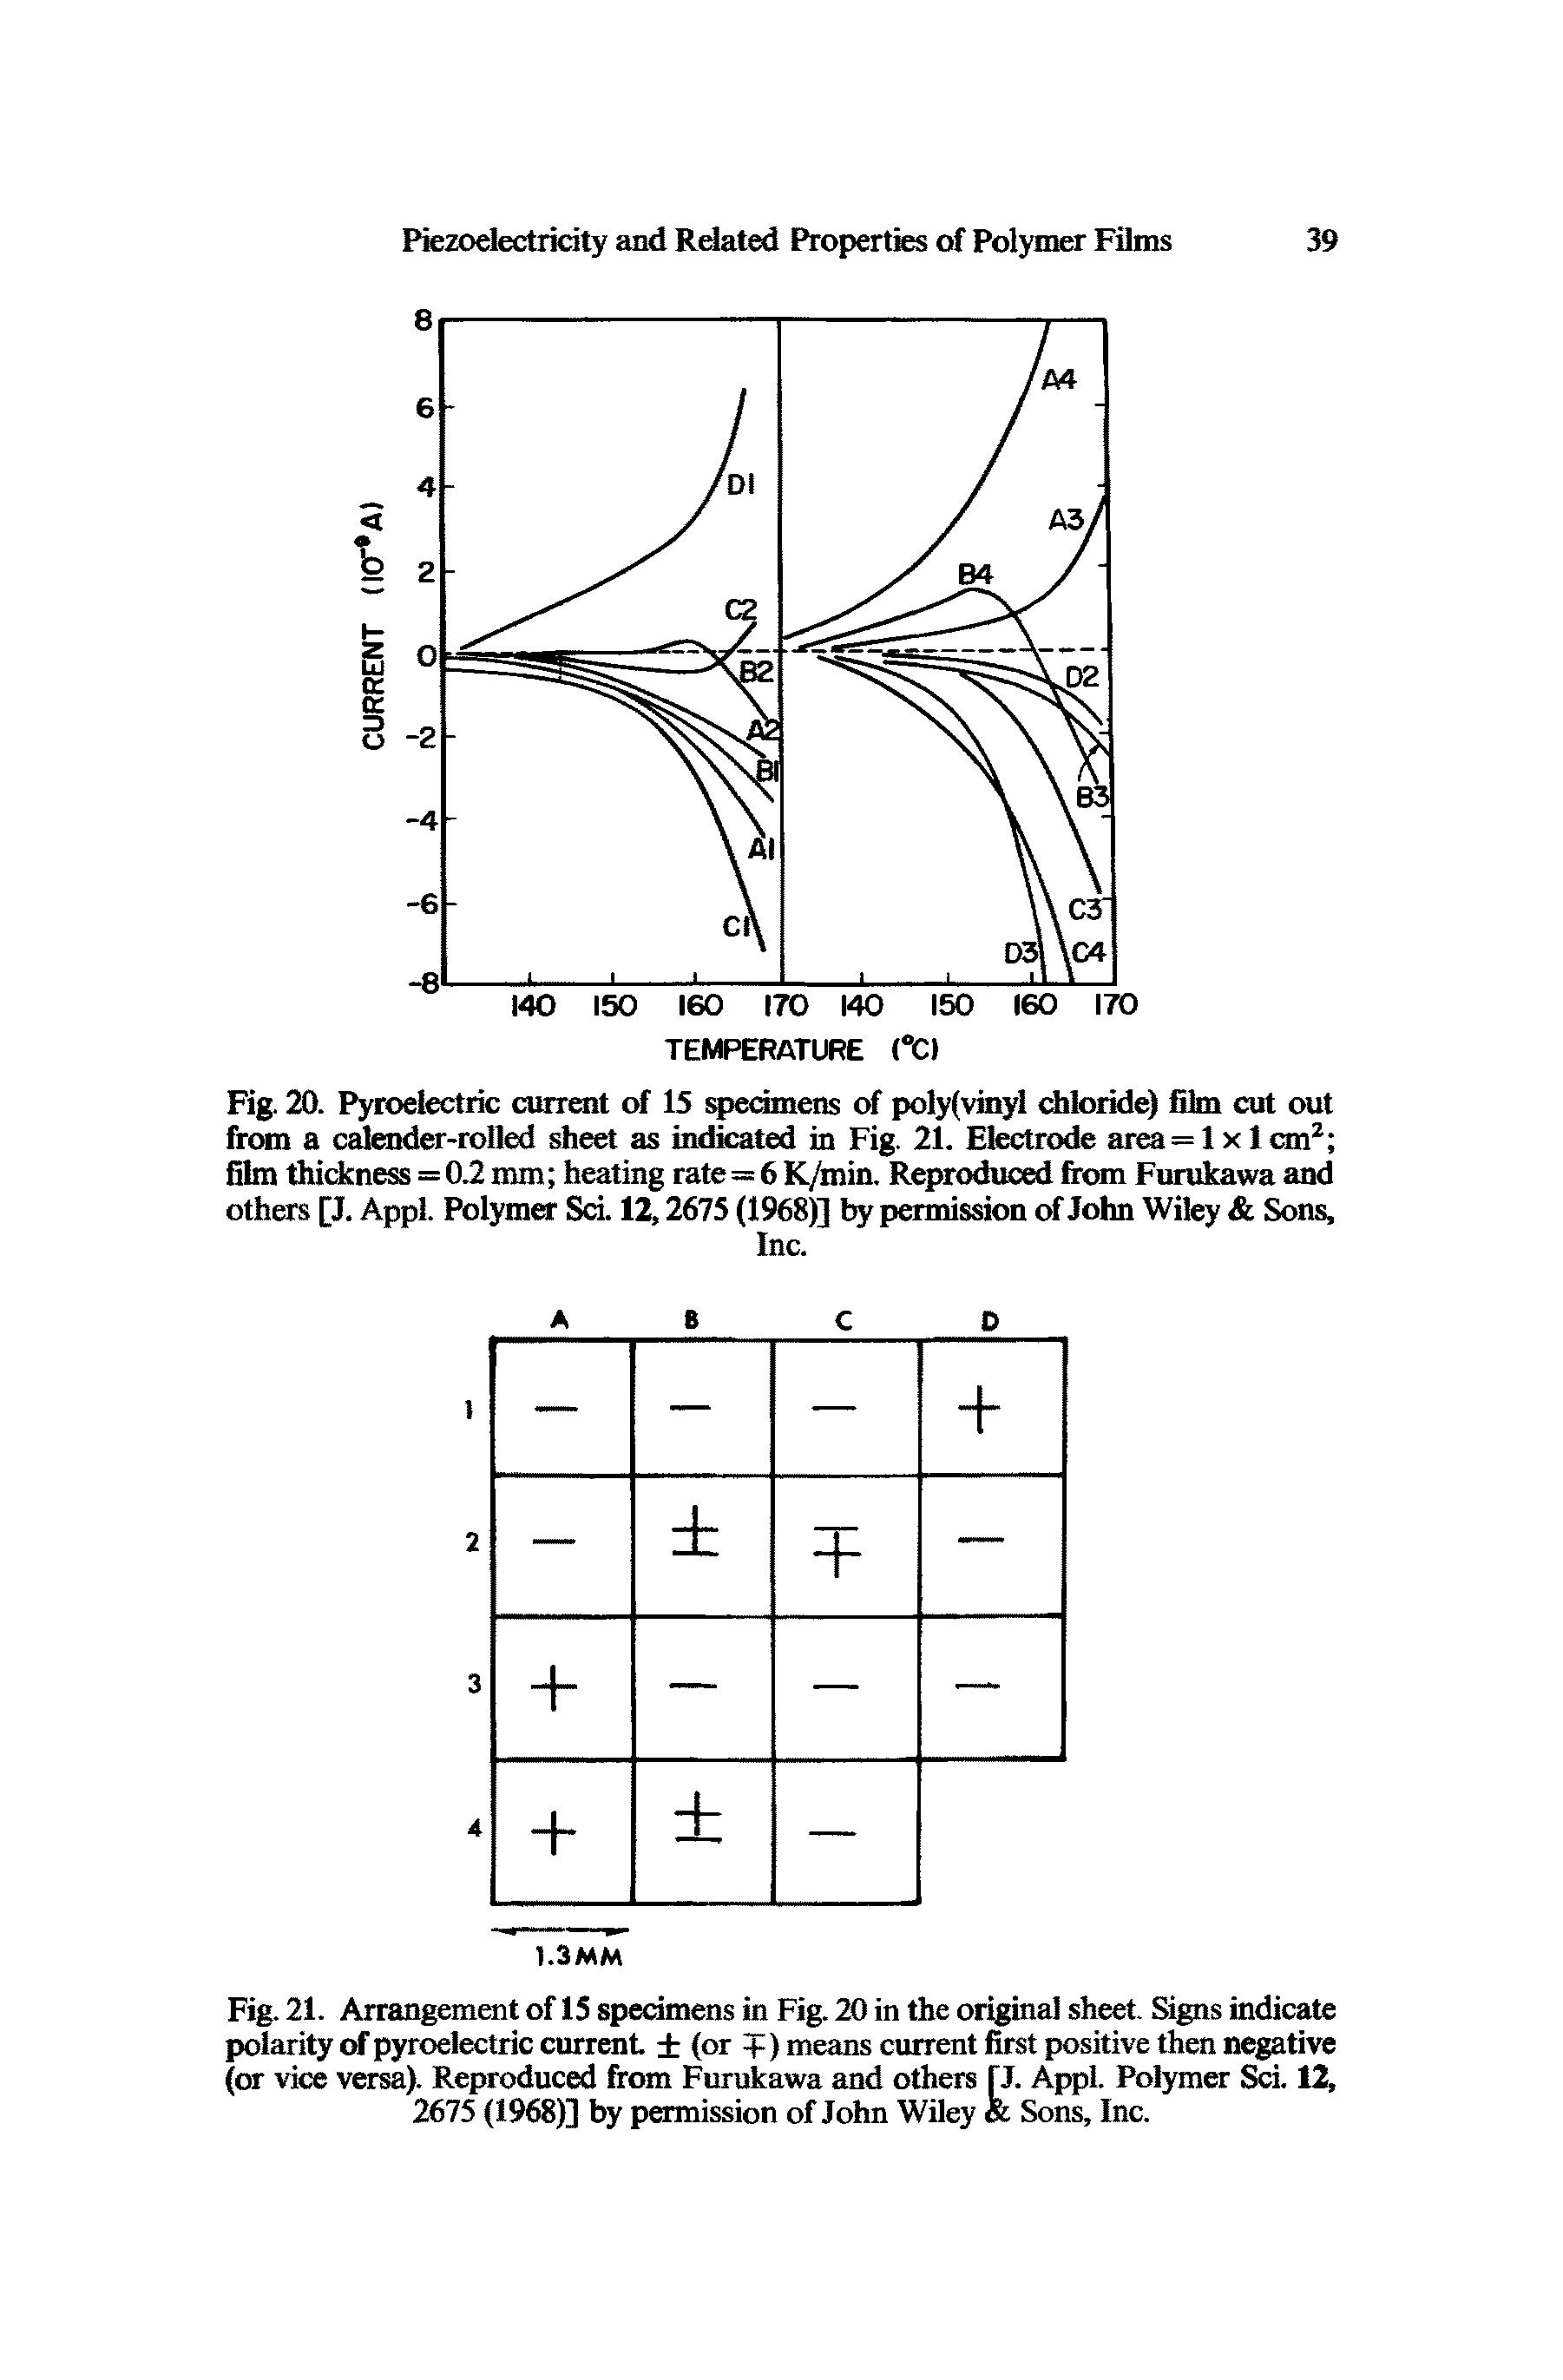 Fig. 21. Arrangement of 15 specimens in Fig. 20 in the original sheet Signs indicate polarity of pyroelectric current (or +) means current first positive then negative (or vice versa). Reproduced from Furukawa and others [J. Appl. Polymer Sci. 12, 2675 (1968)] by permission of John Wiley Sons, Inc.